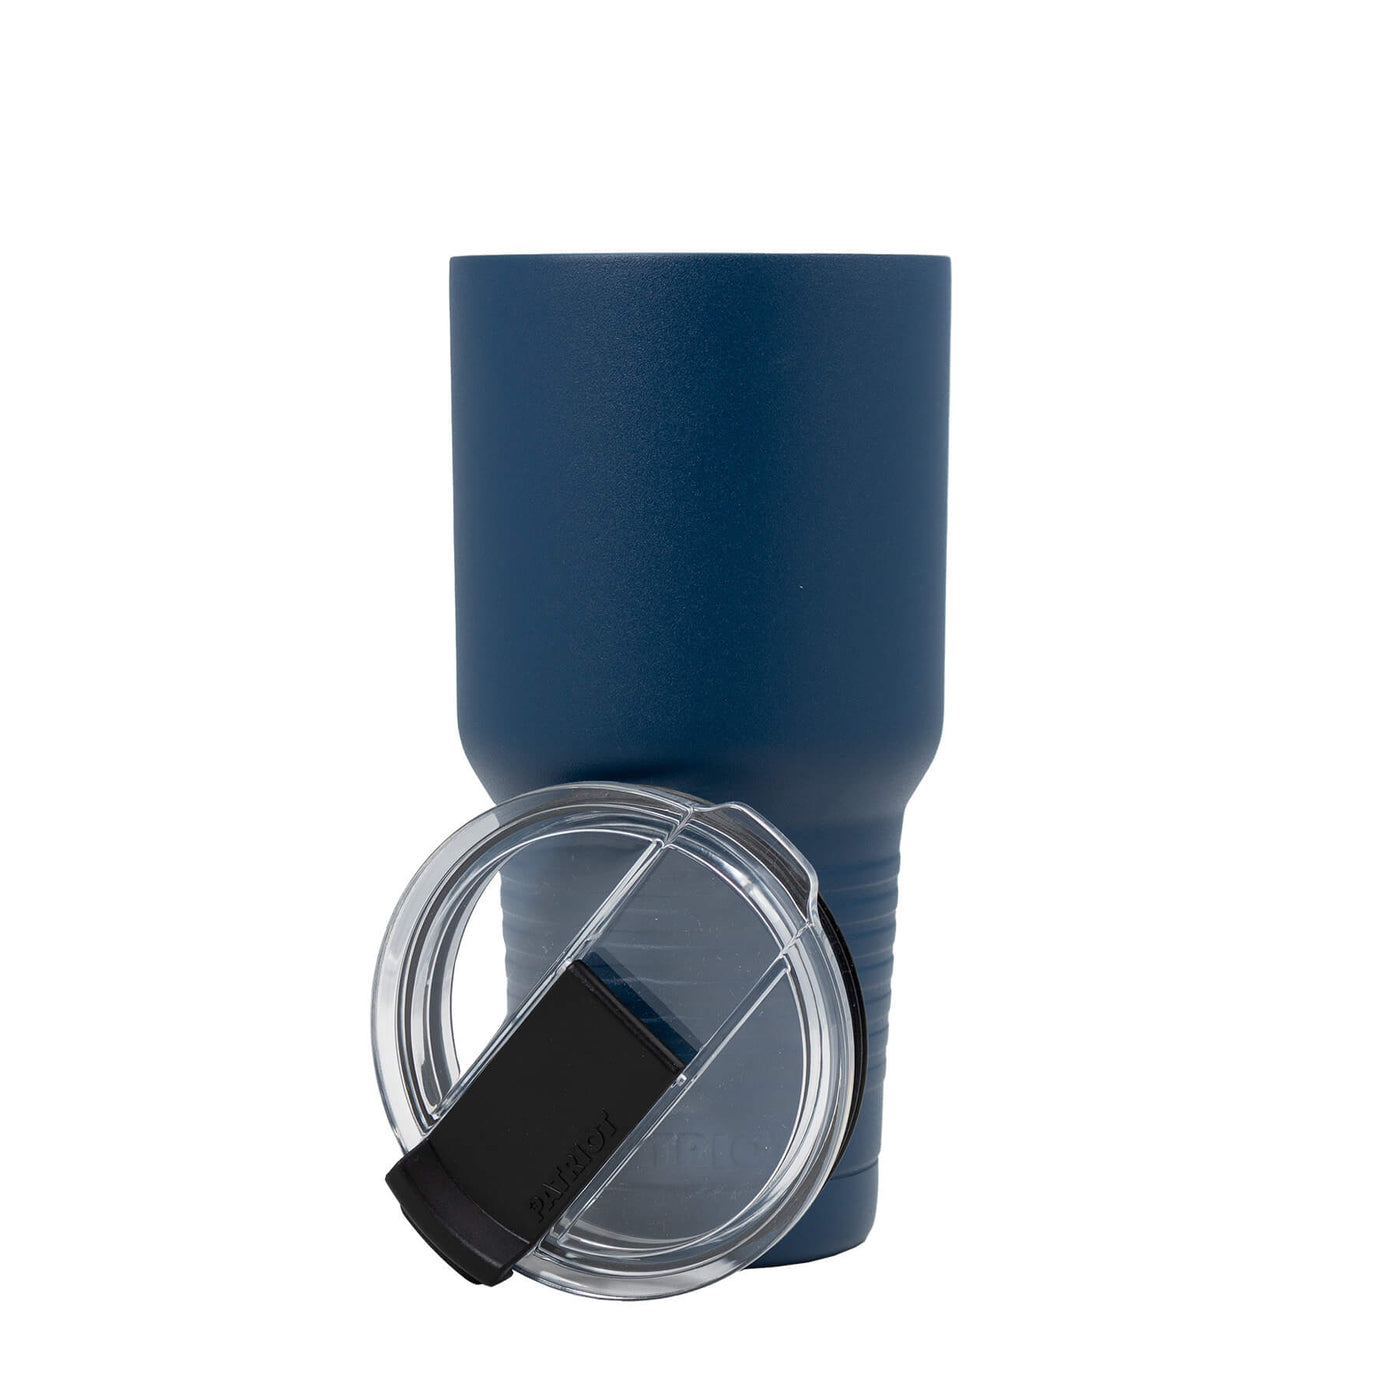 RTIC 20 oz. Vacuum Insulated Stainless Steel Tumbler - Matte Navy, Blue